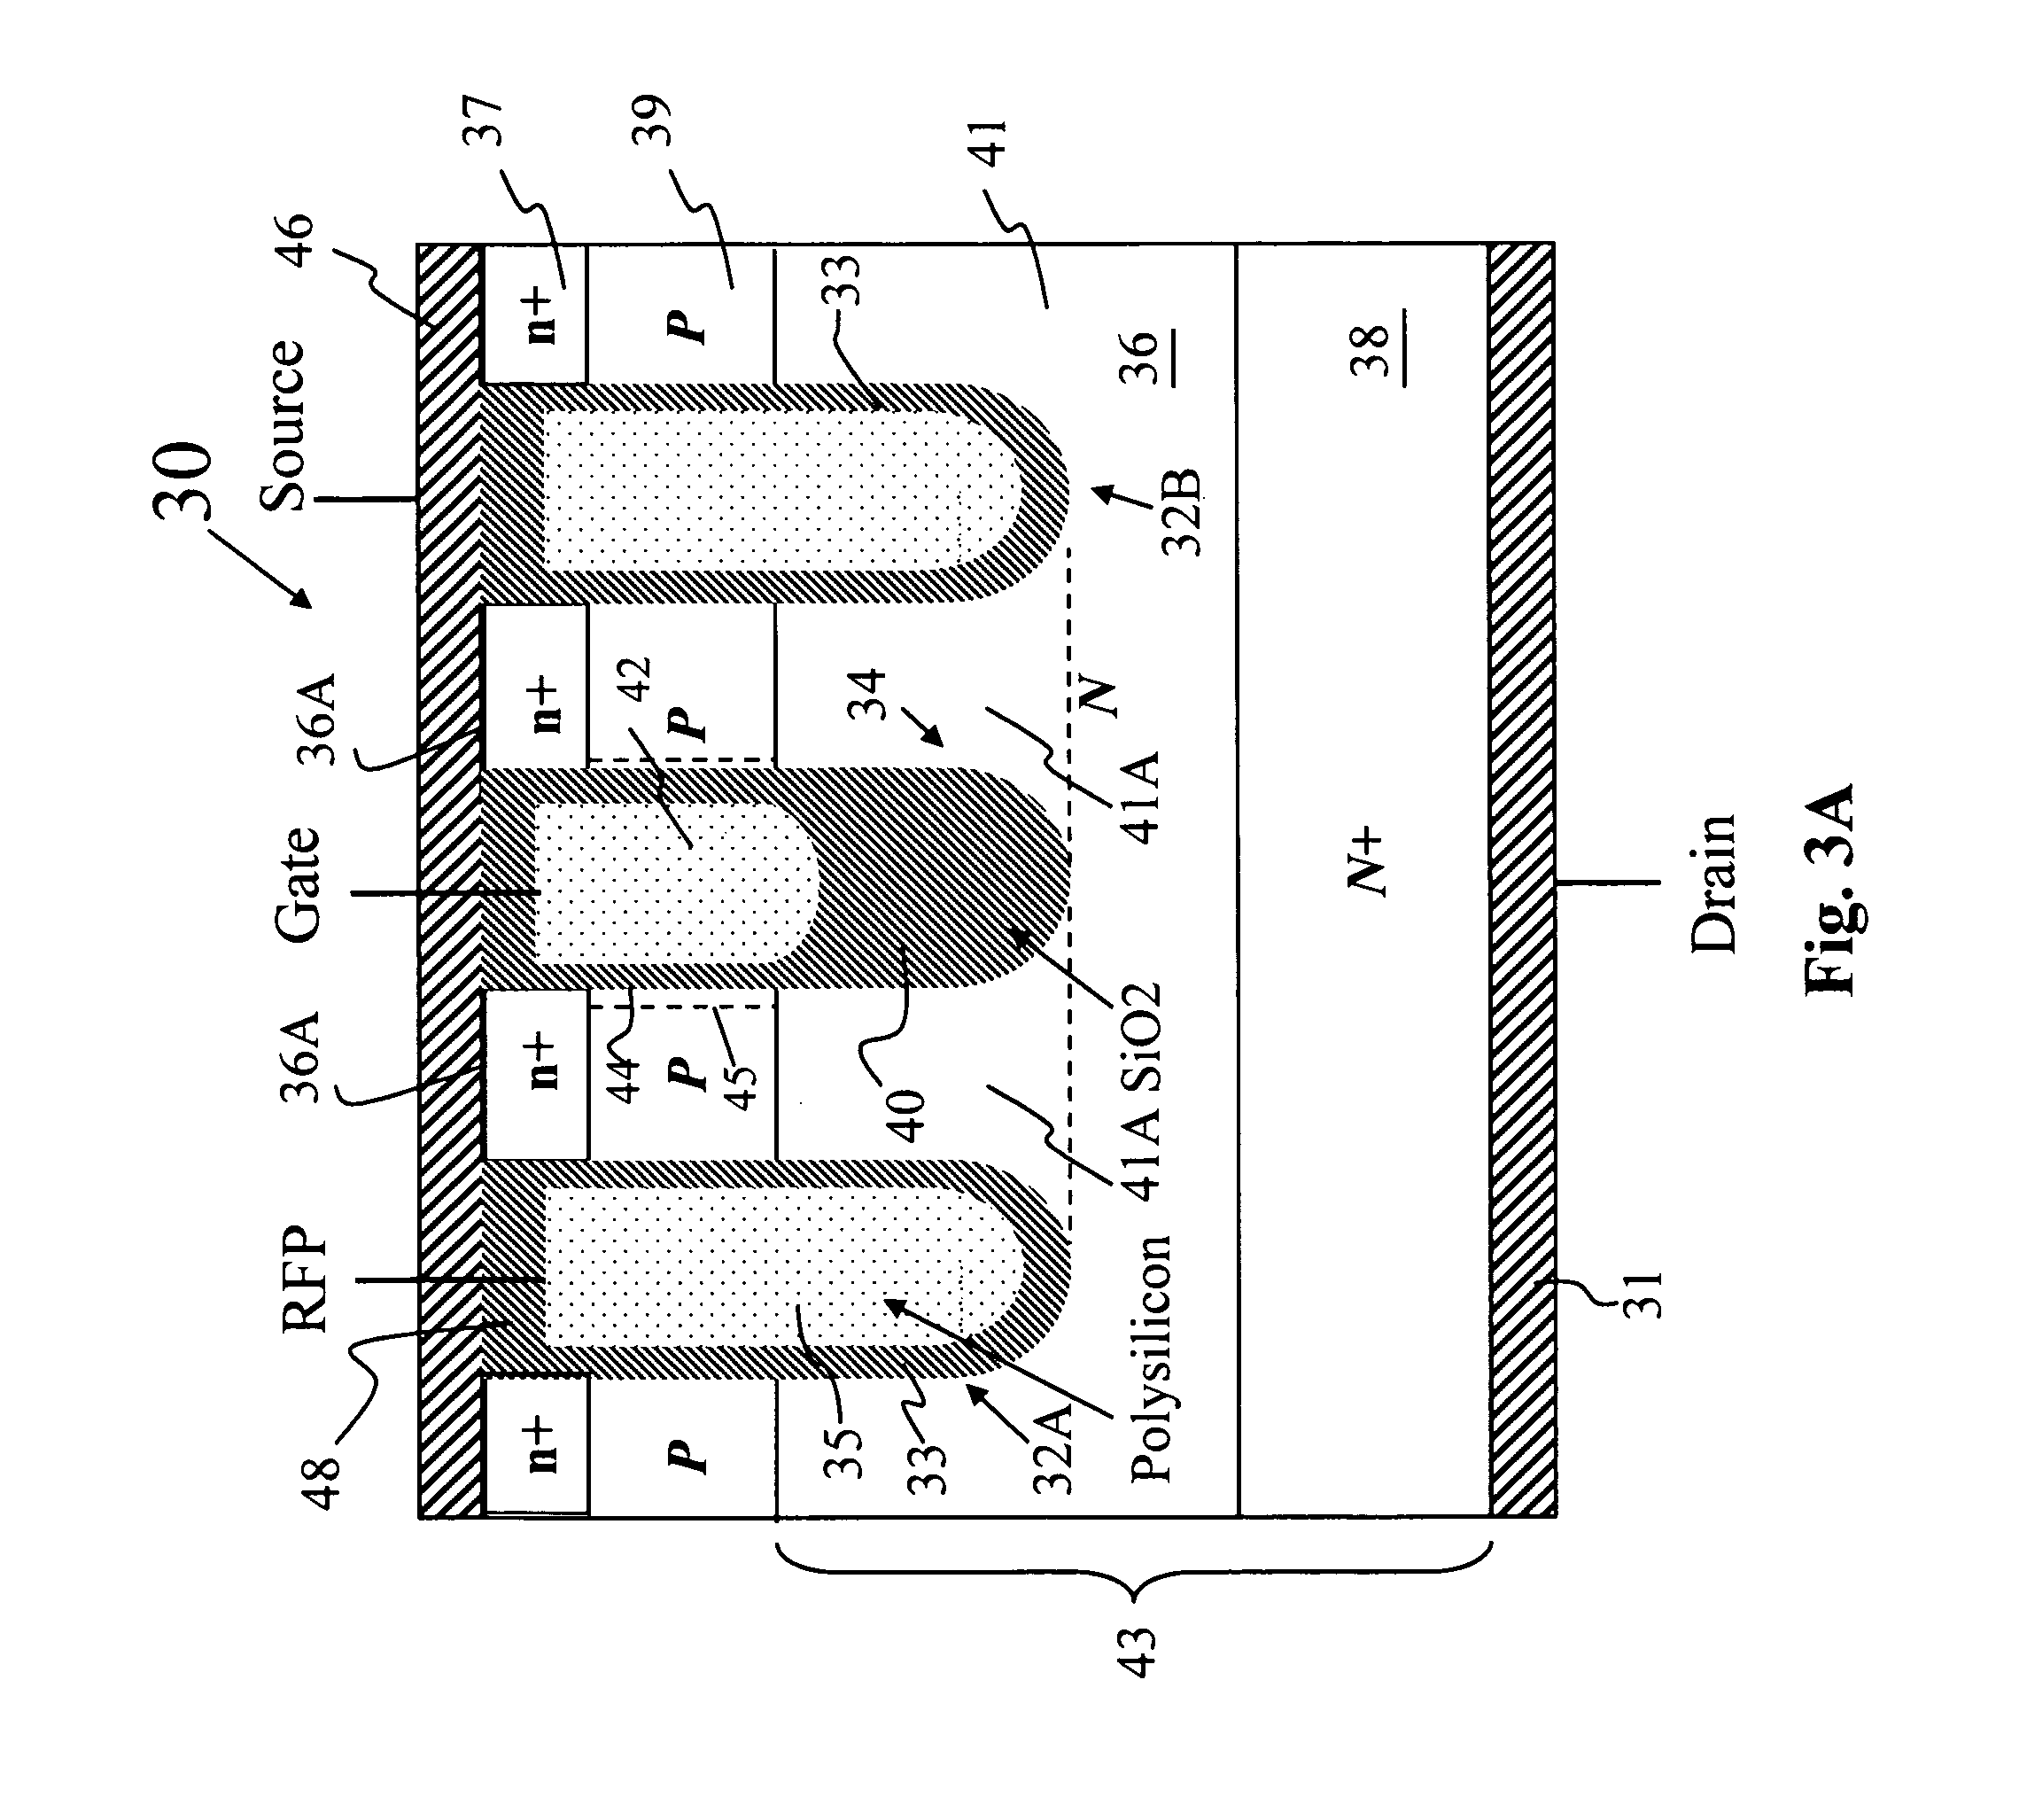 Power MOSFET with recessed field plate